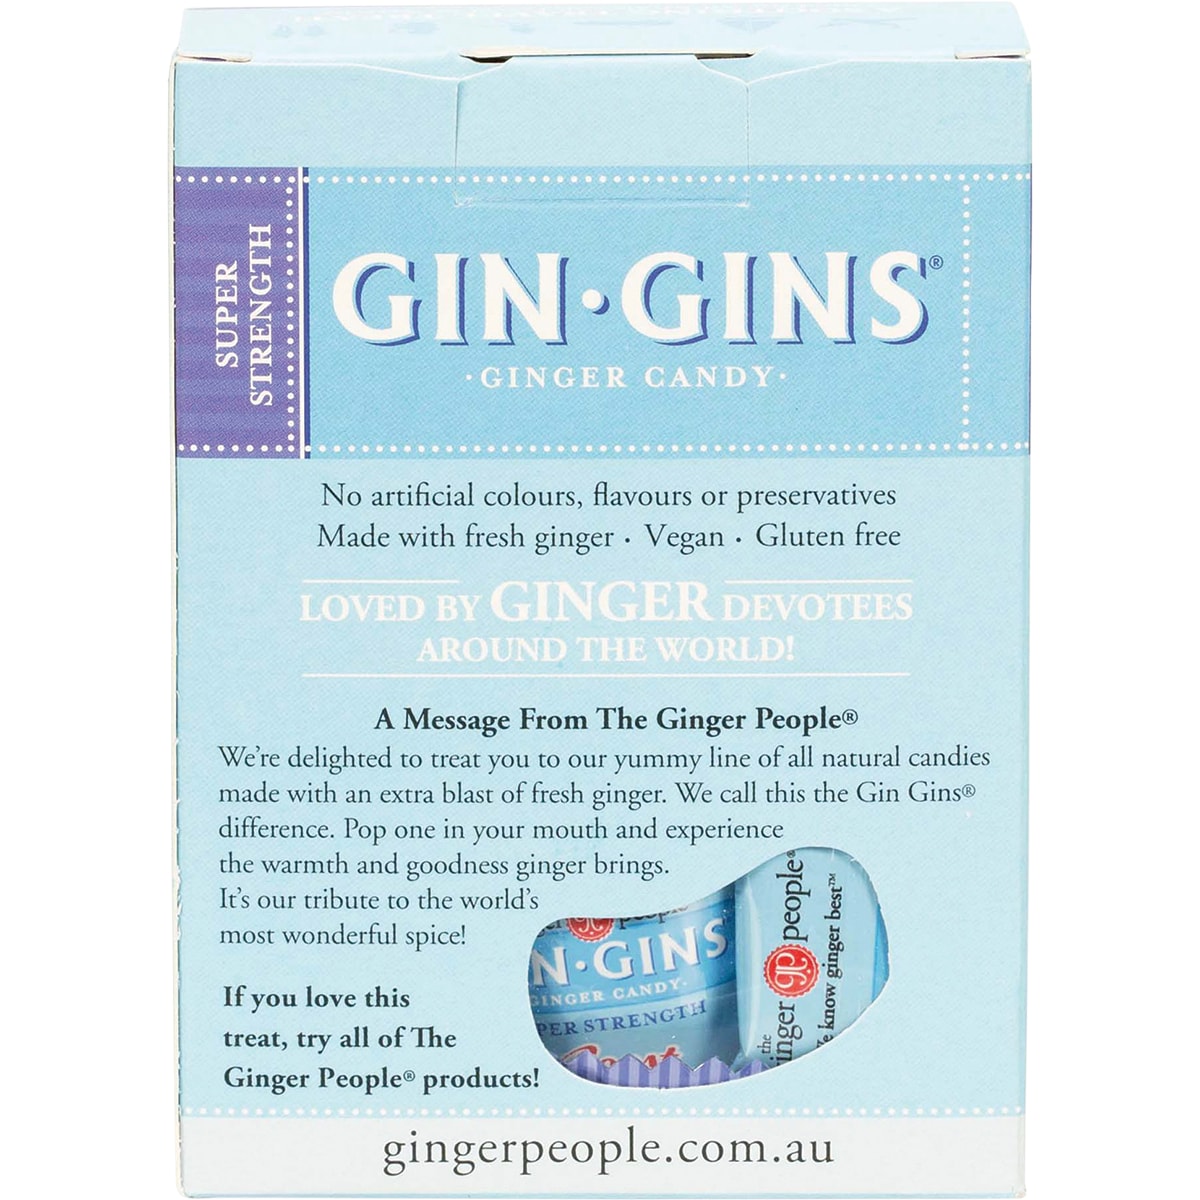 The Ginger People Gin Gins Super Strength 84G